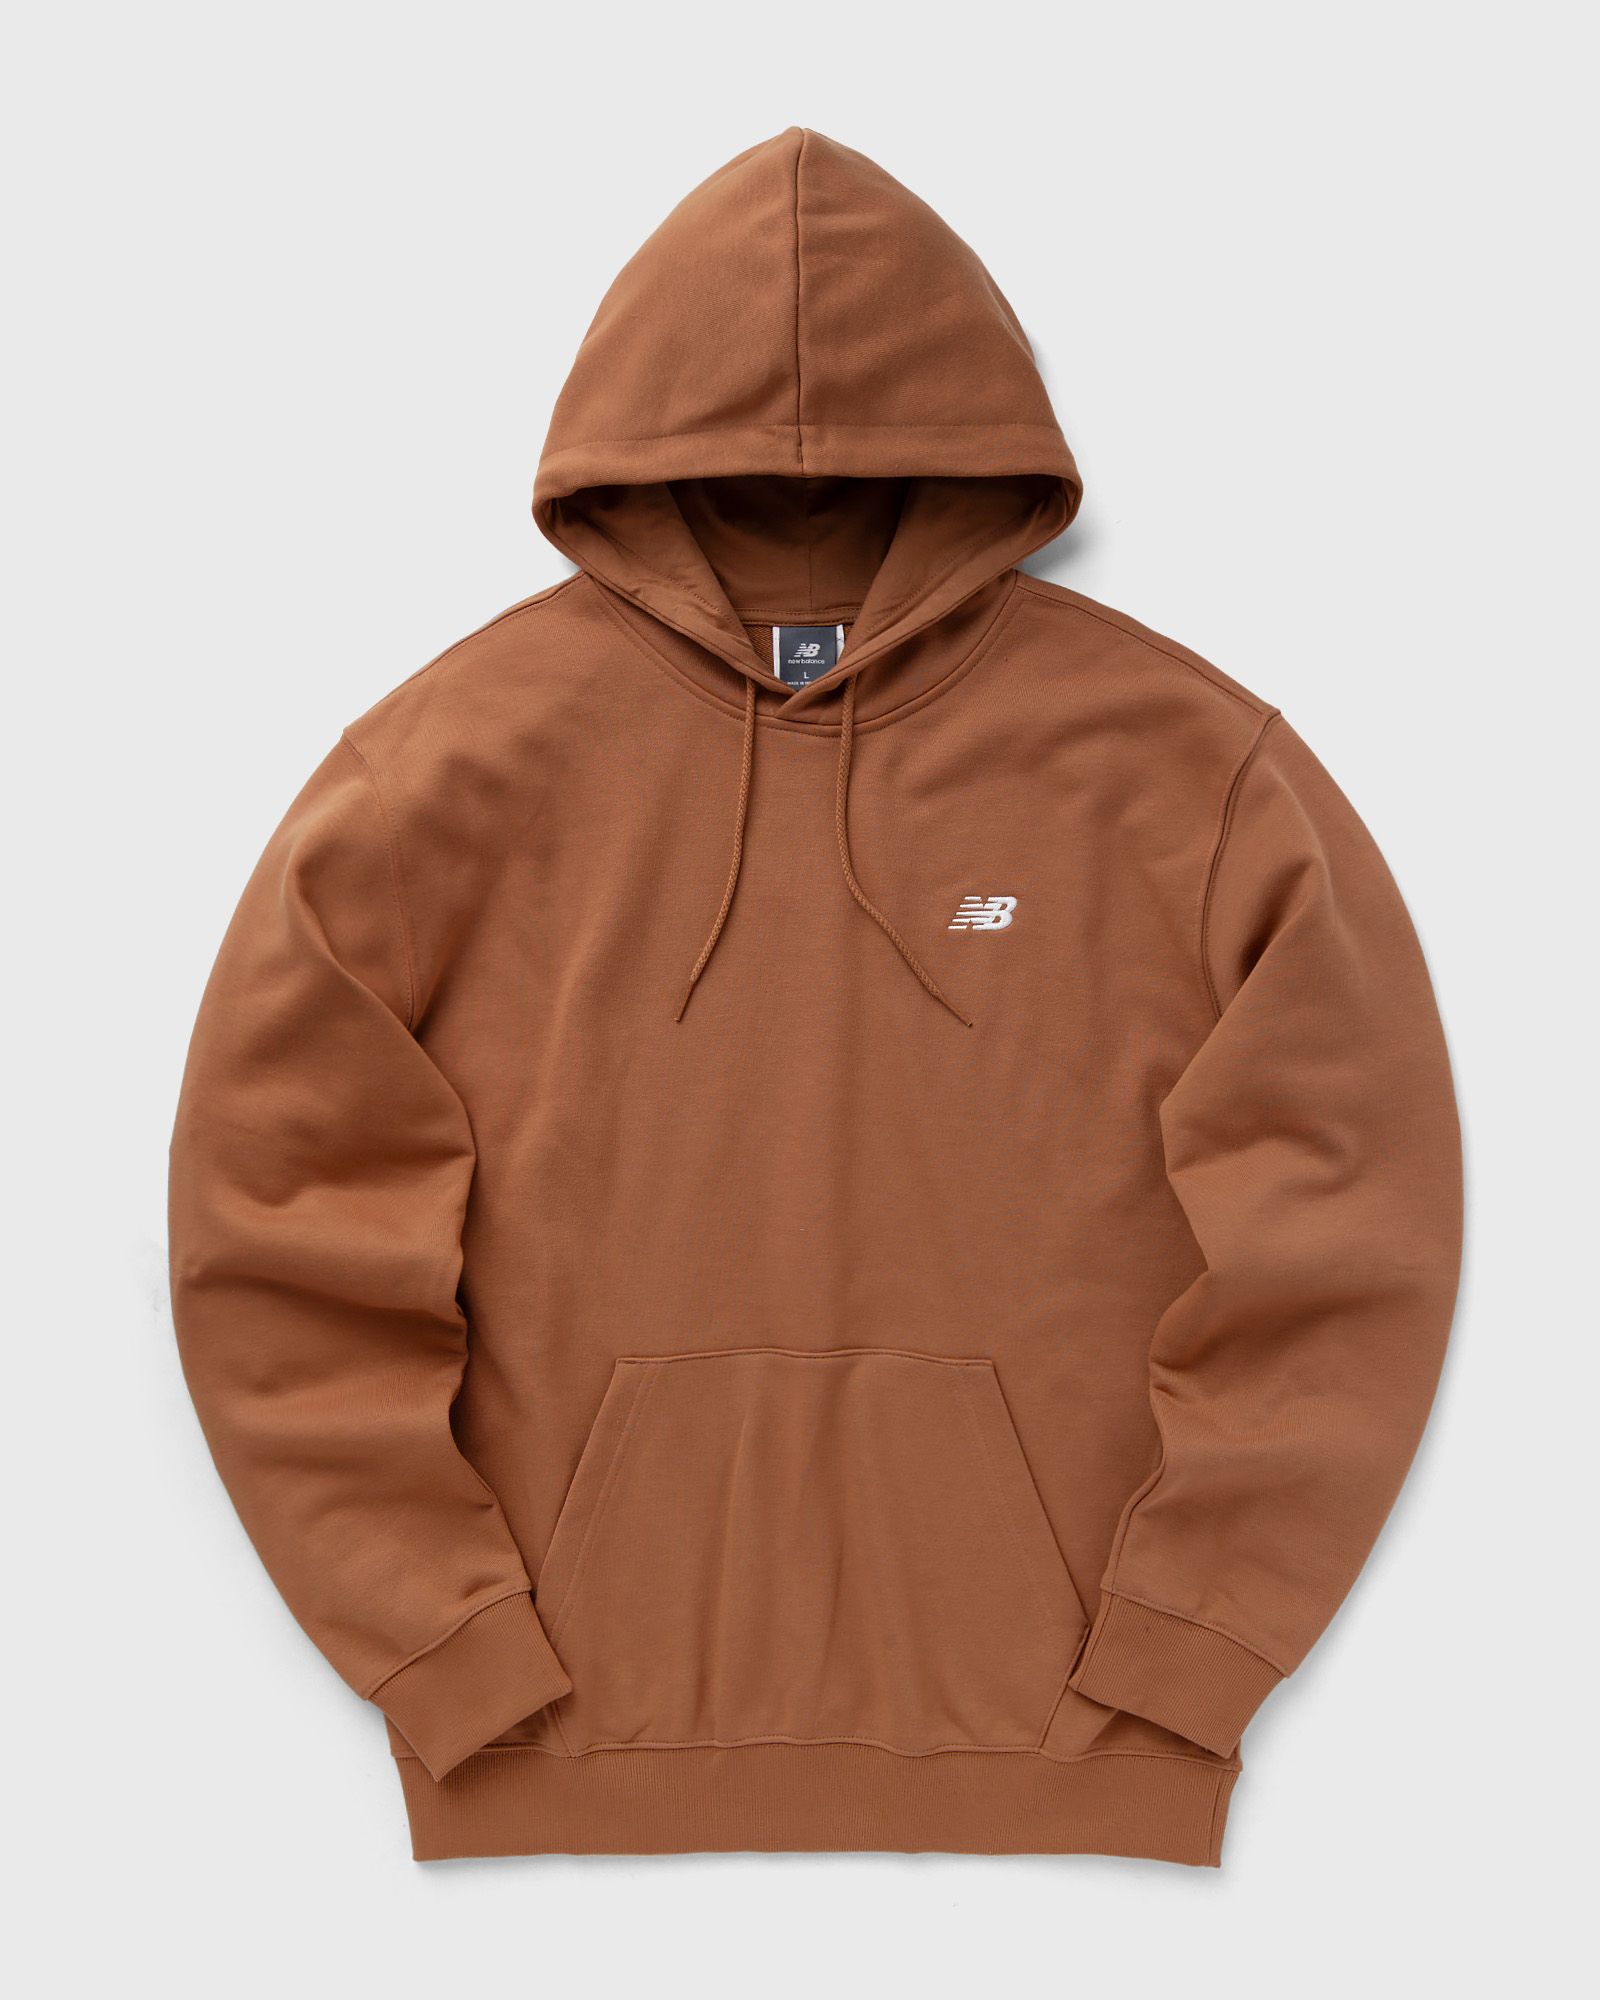 New Balance - small logo french terry hoodie men hoodies brown in größe:s